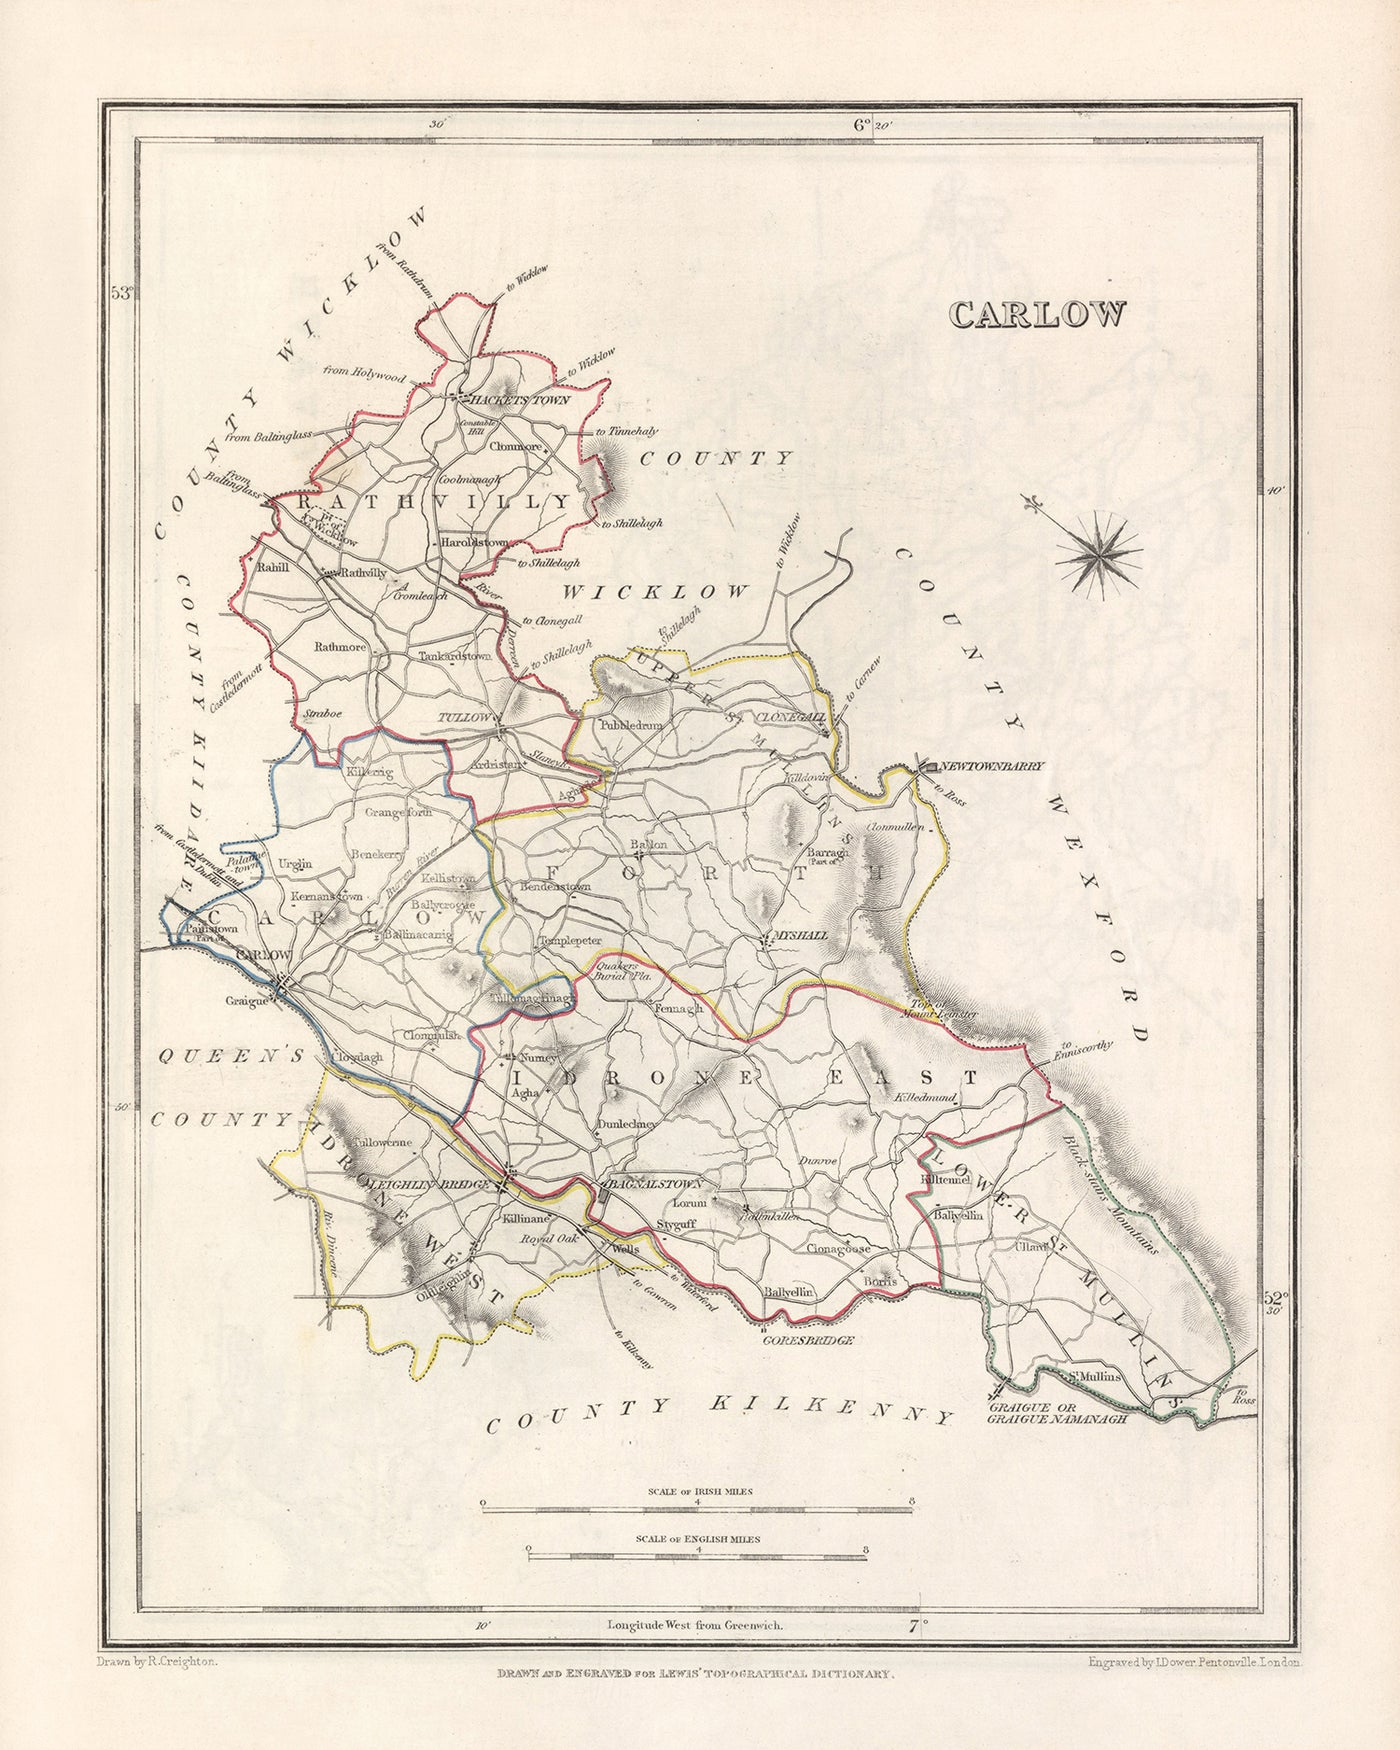 Old Map of County Carlow by Samuel Lewis, 1844: Tullow, Hacketstown, Leighlinbridge, Rathvilly, Myshall